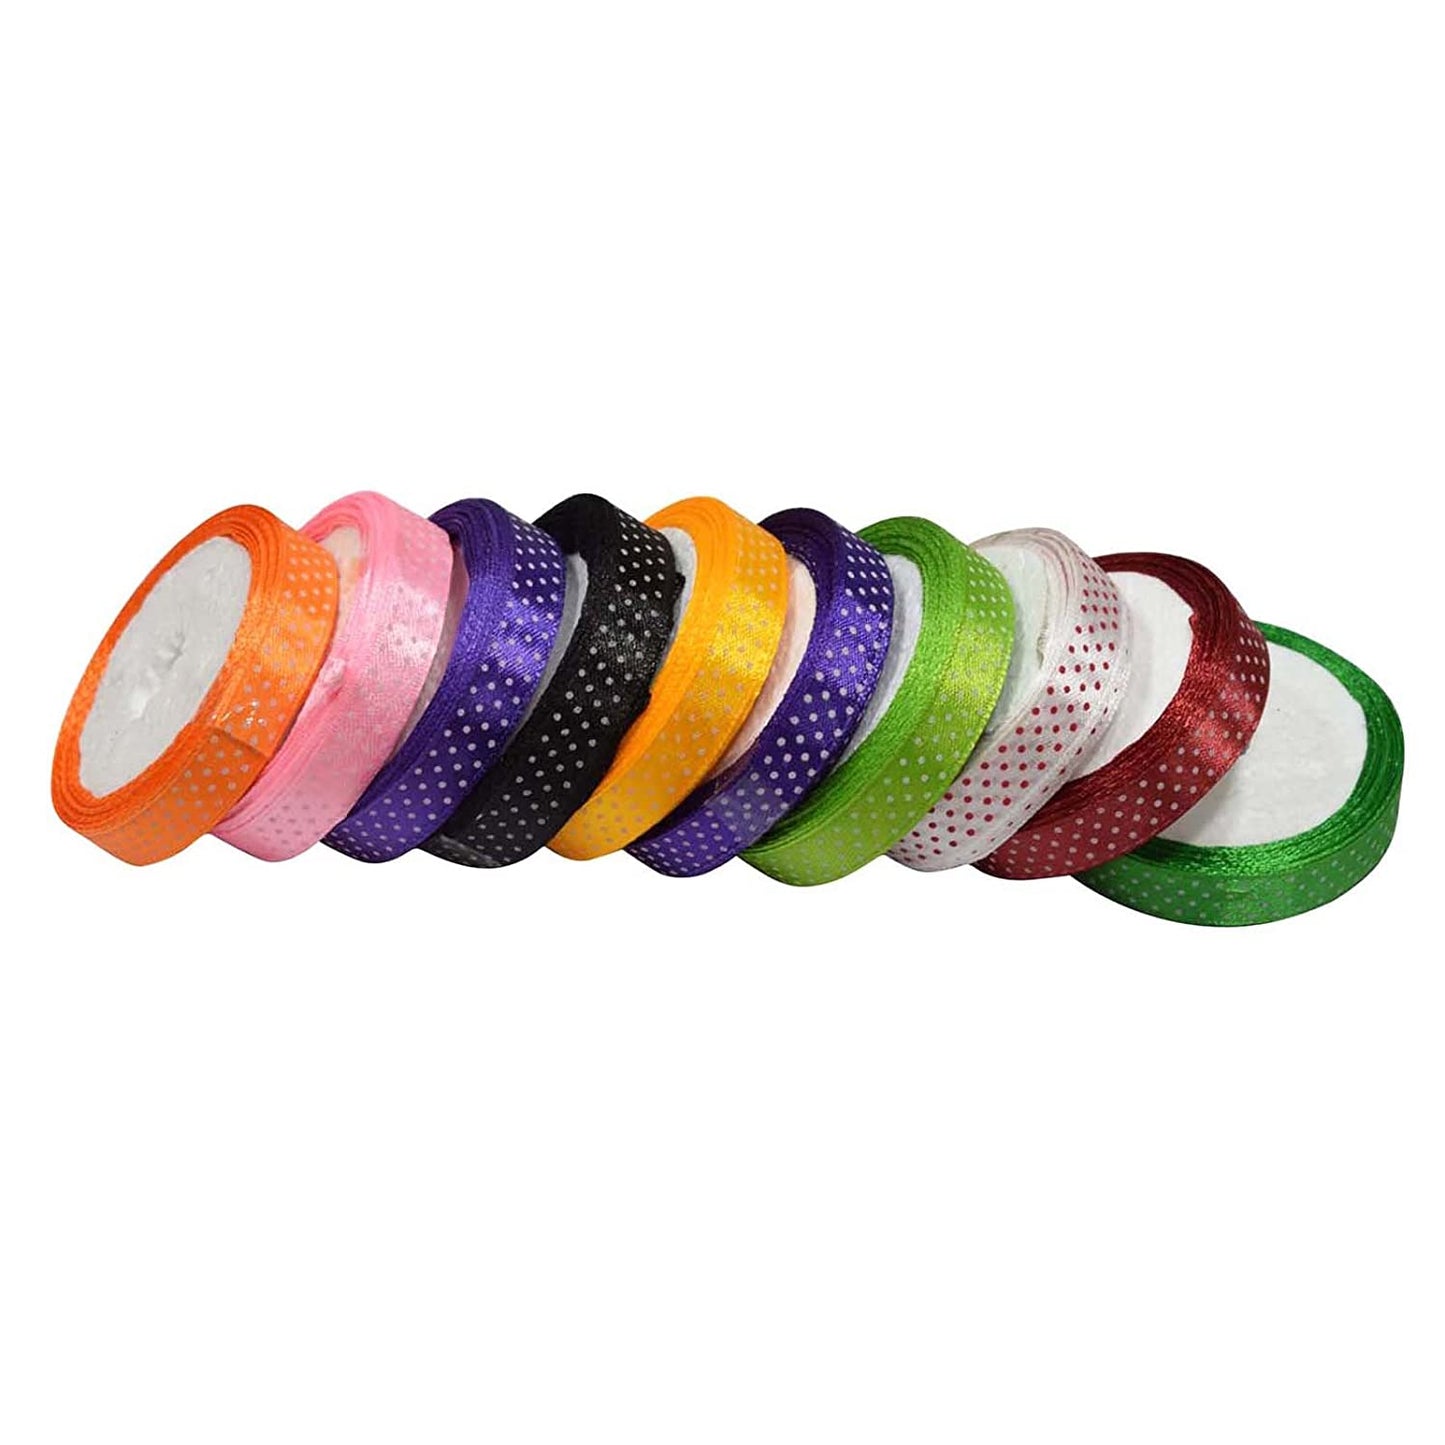 Dotted Satin Ribbon Multi Color, 0.5 Inches 10 Meter Each, Pack of 10 Rolls